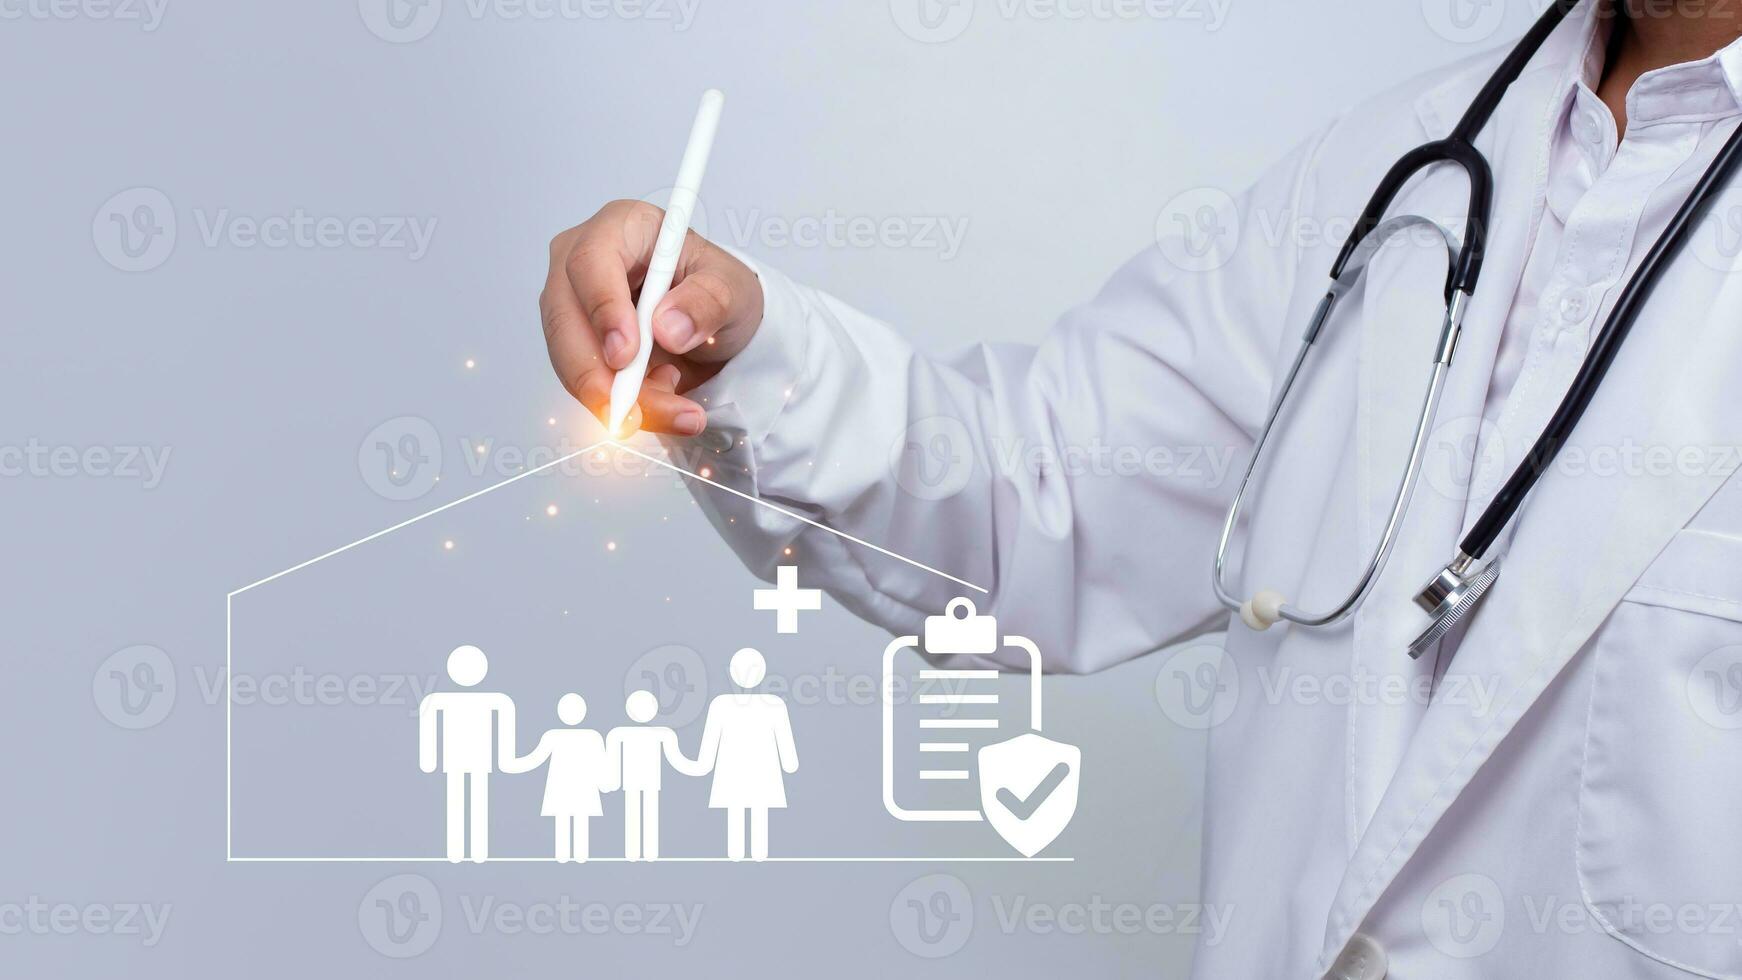 Doctor points stylus pen to show family icons in house frame and plus sign. Concept of health insurance and medical benefits. Health insurance and access to health care. Health care planning. photo